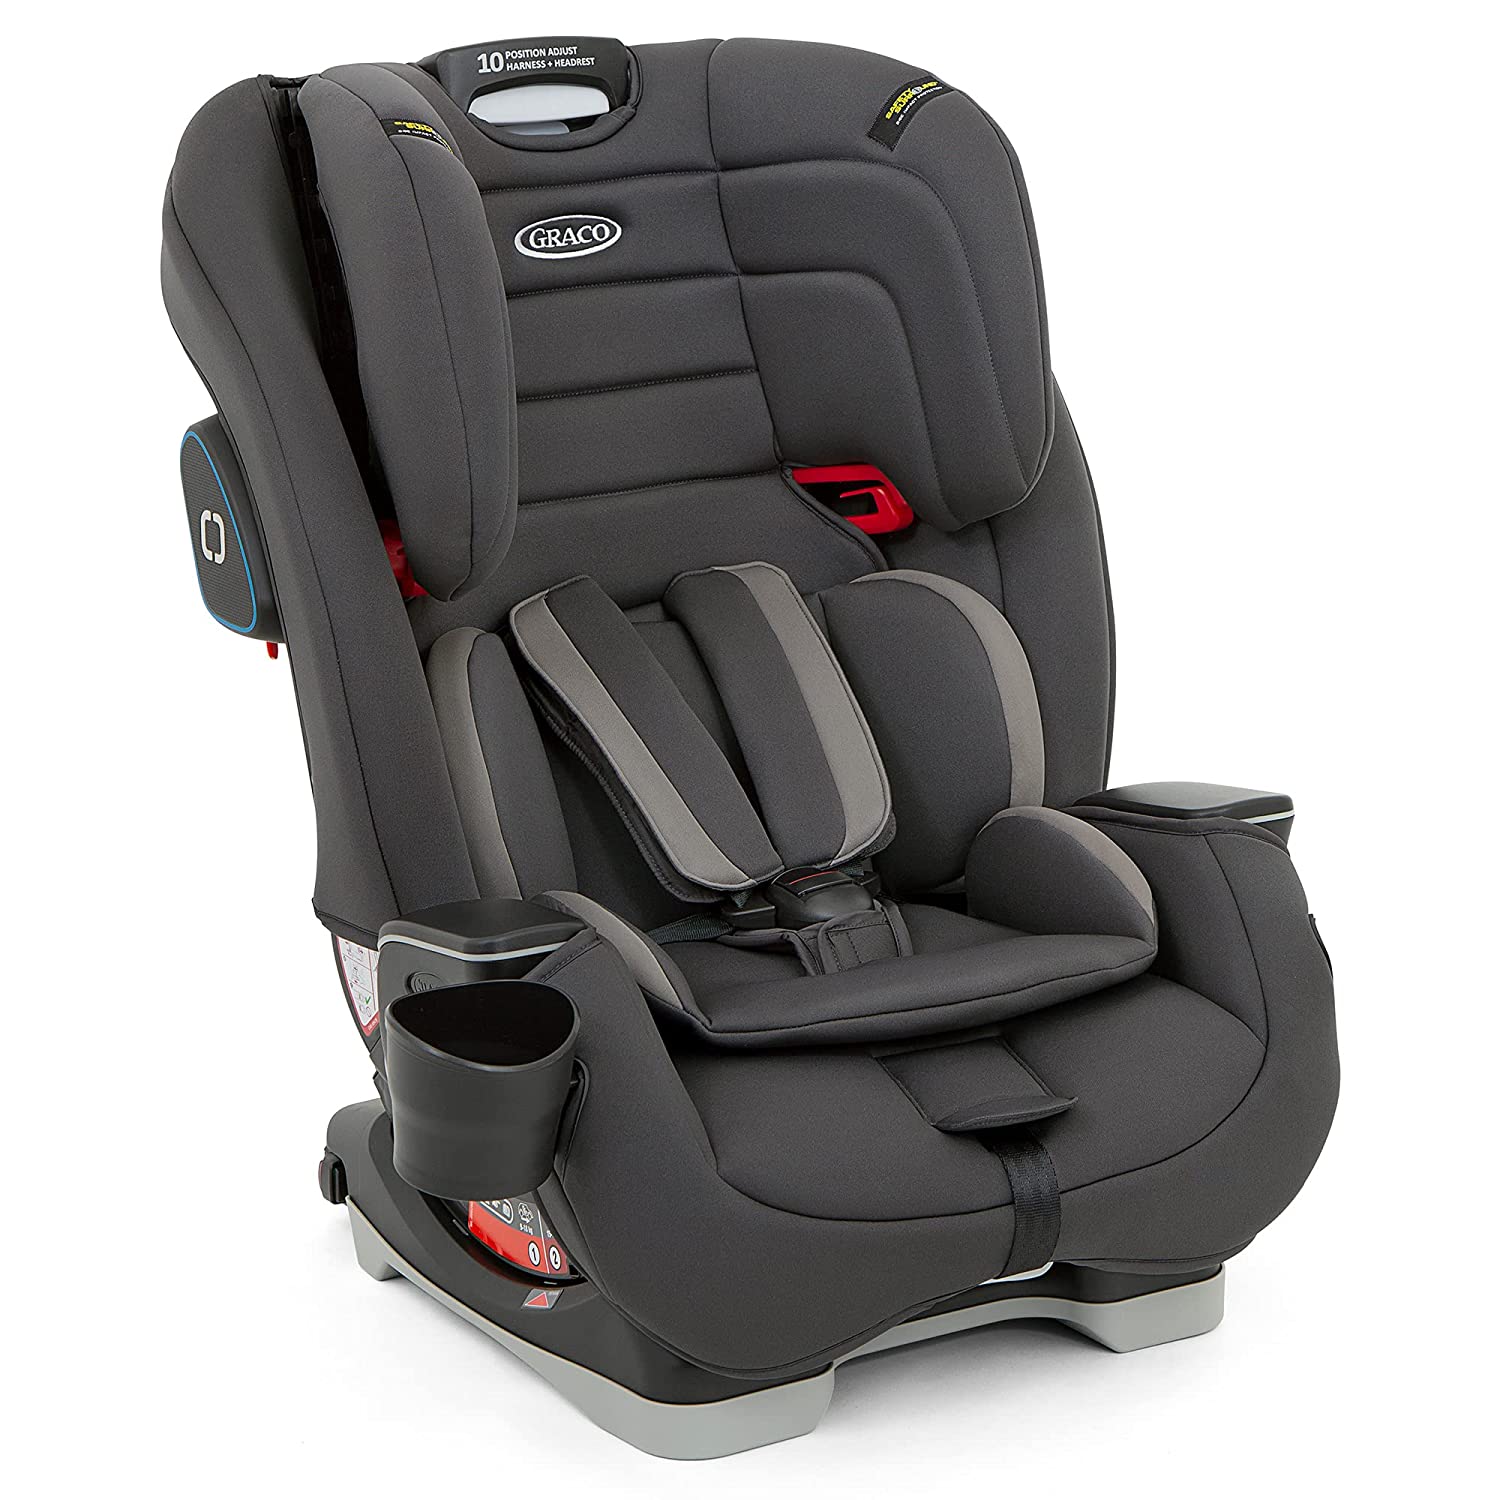 Graco Avolve Group 1/2/3 Child Seat with Isofix Car Seat from Approx. 1 Year to 12 Years (9 to 36 kg), 5-Point Harness, Charcoal, Grey